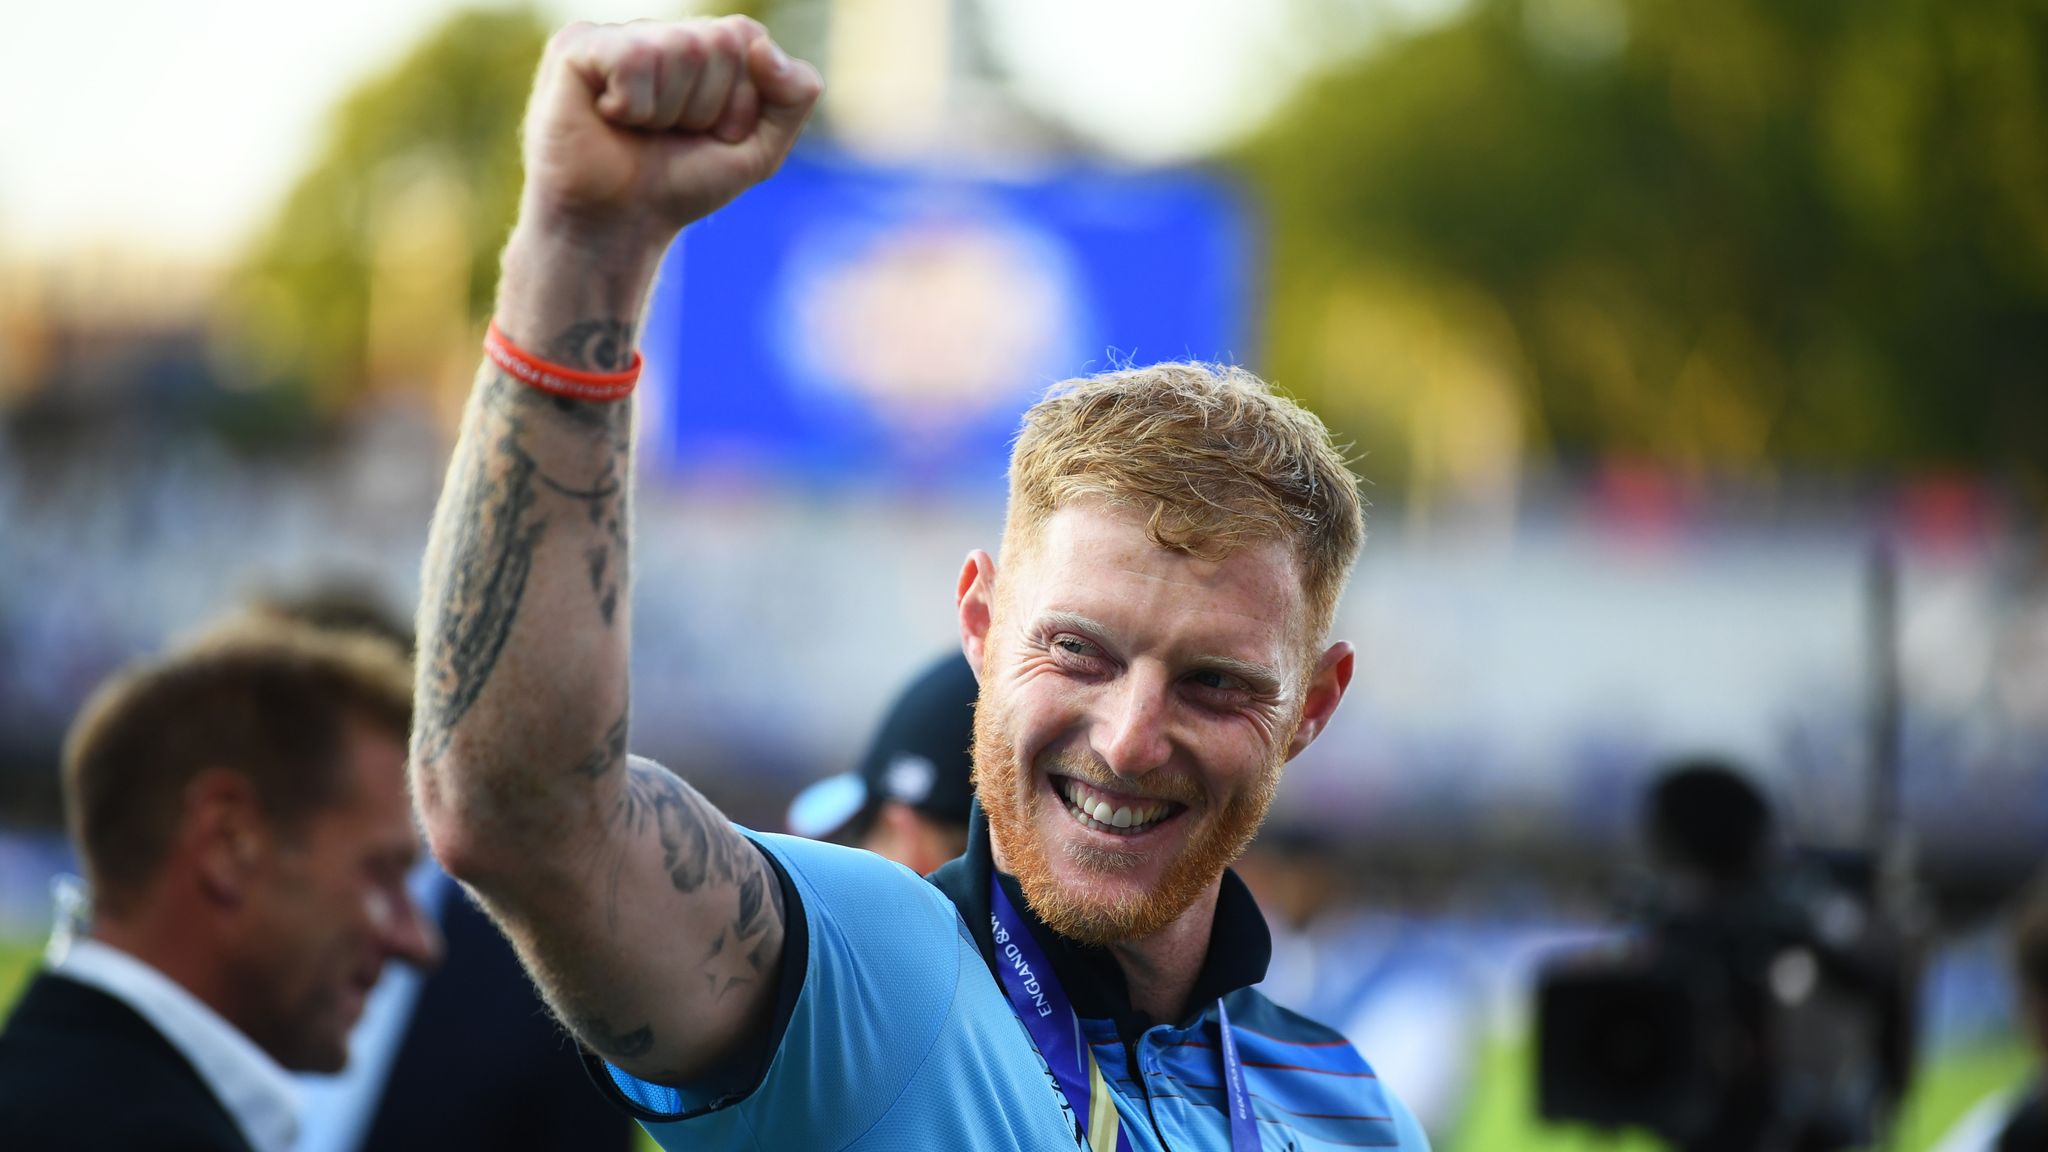 Ben Stokes: 2019 World Cup summer eclipsed England's 2005 Ashes win ...